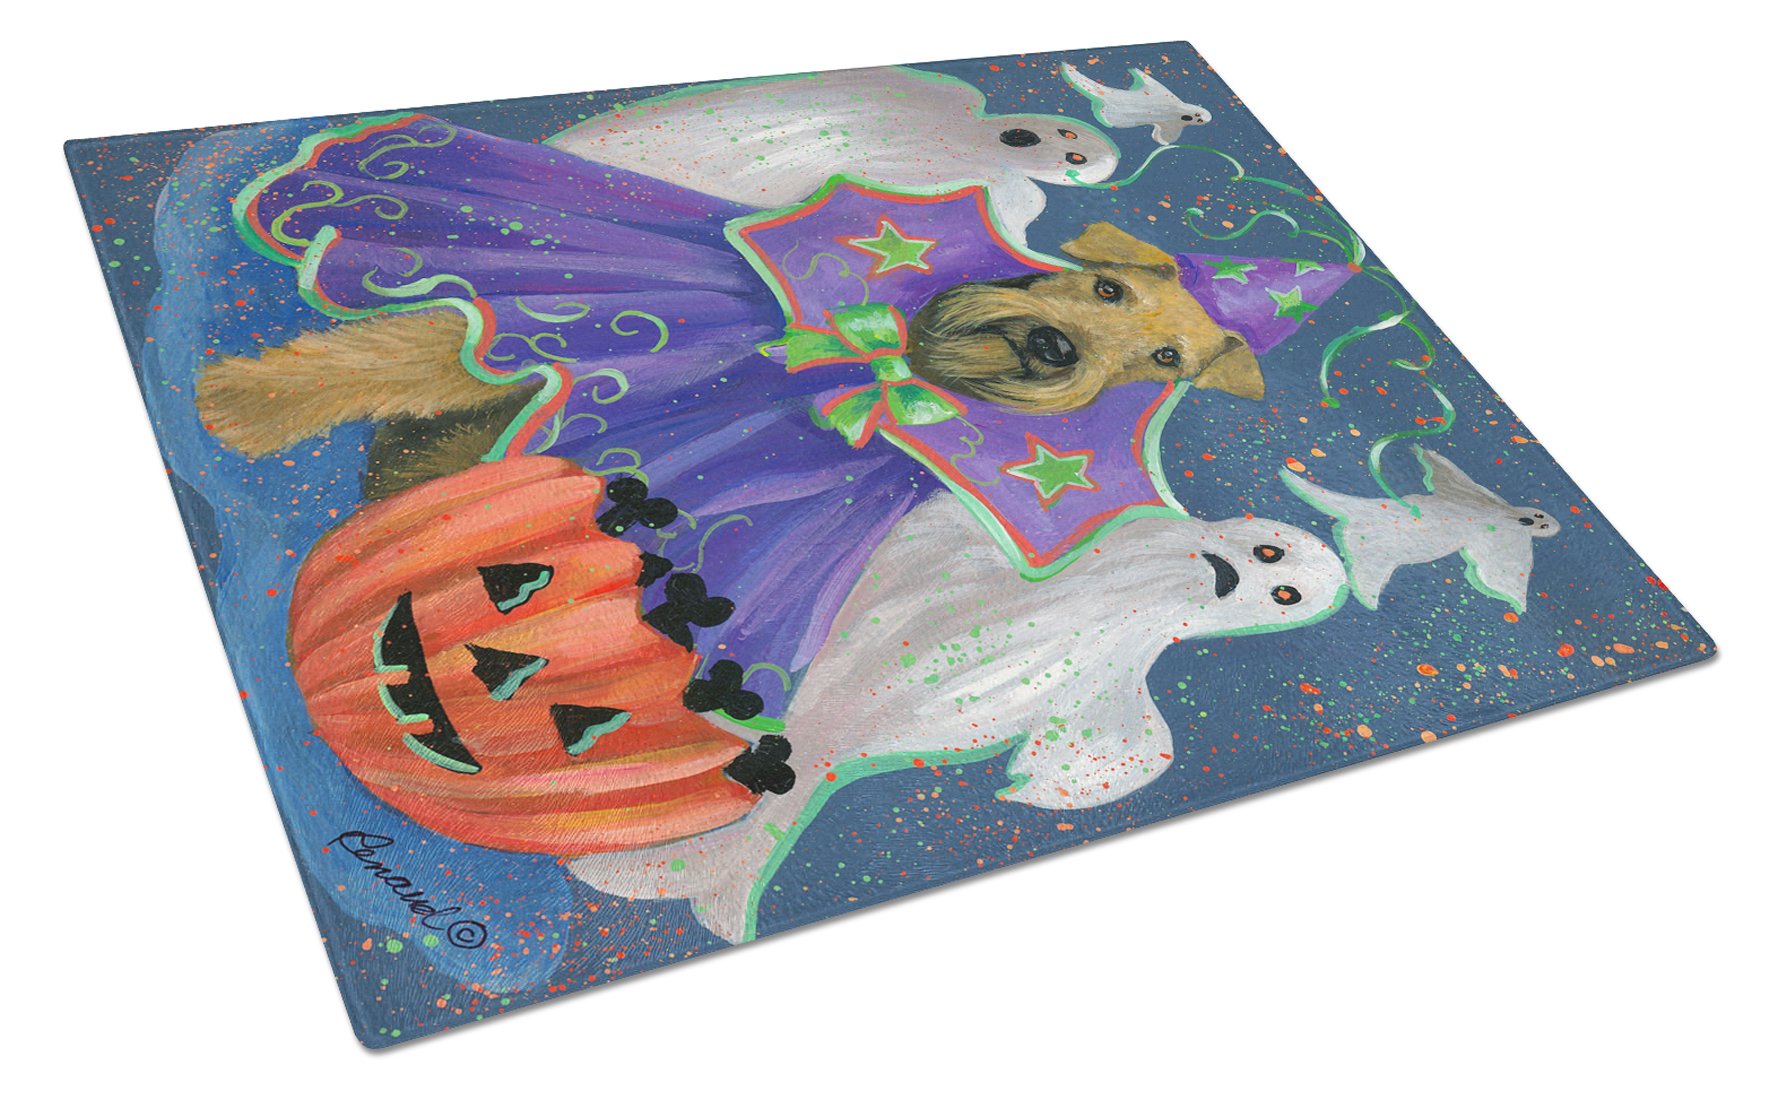 Airedale Boo Hoo Halloween Glass Cutting Board Large PPP3002LCB by Caroline's Treasures